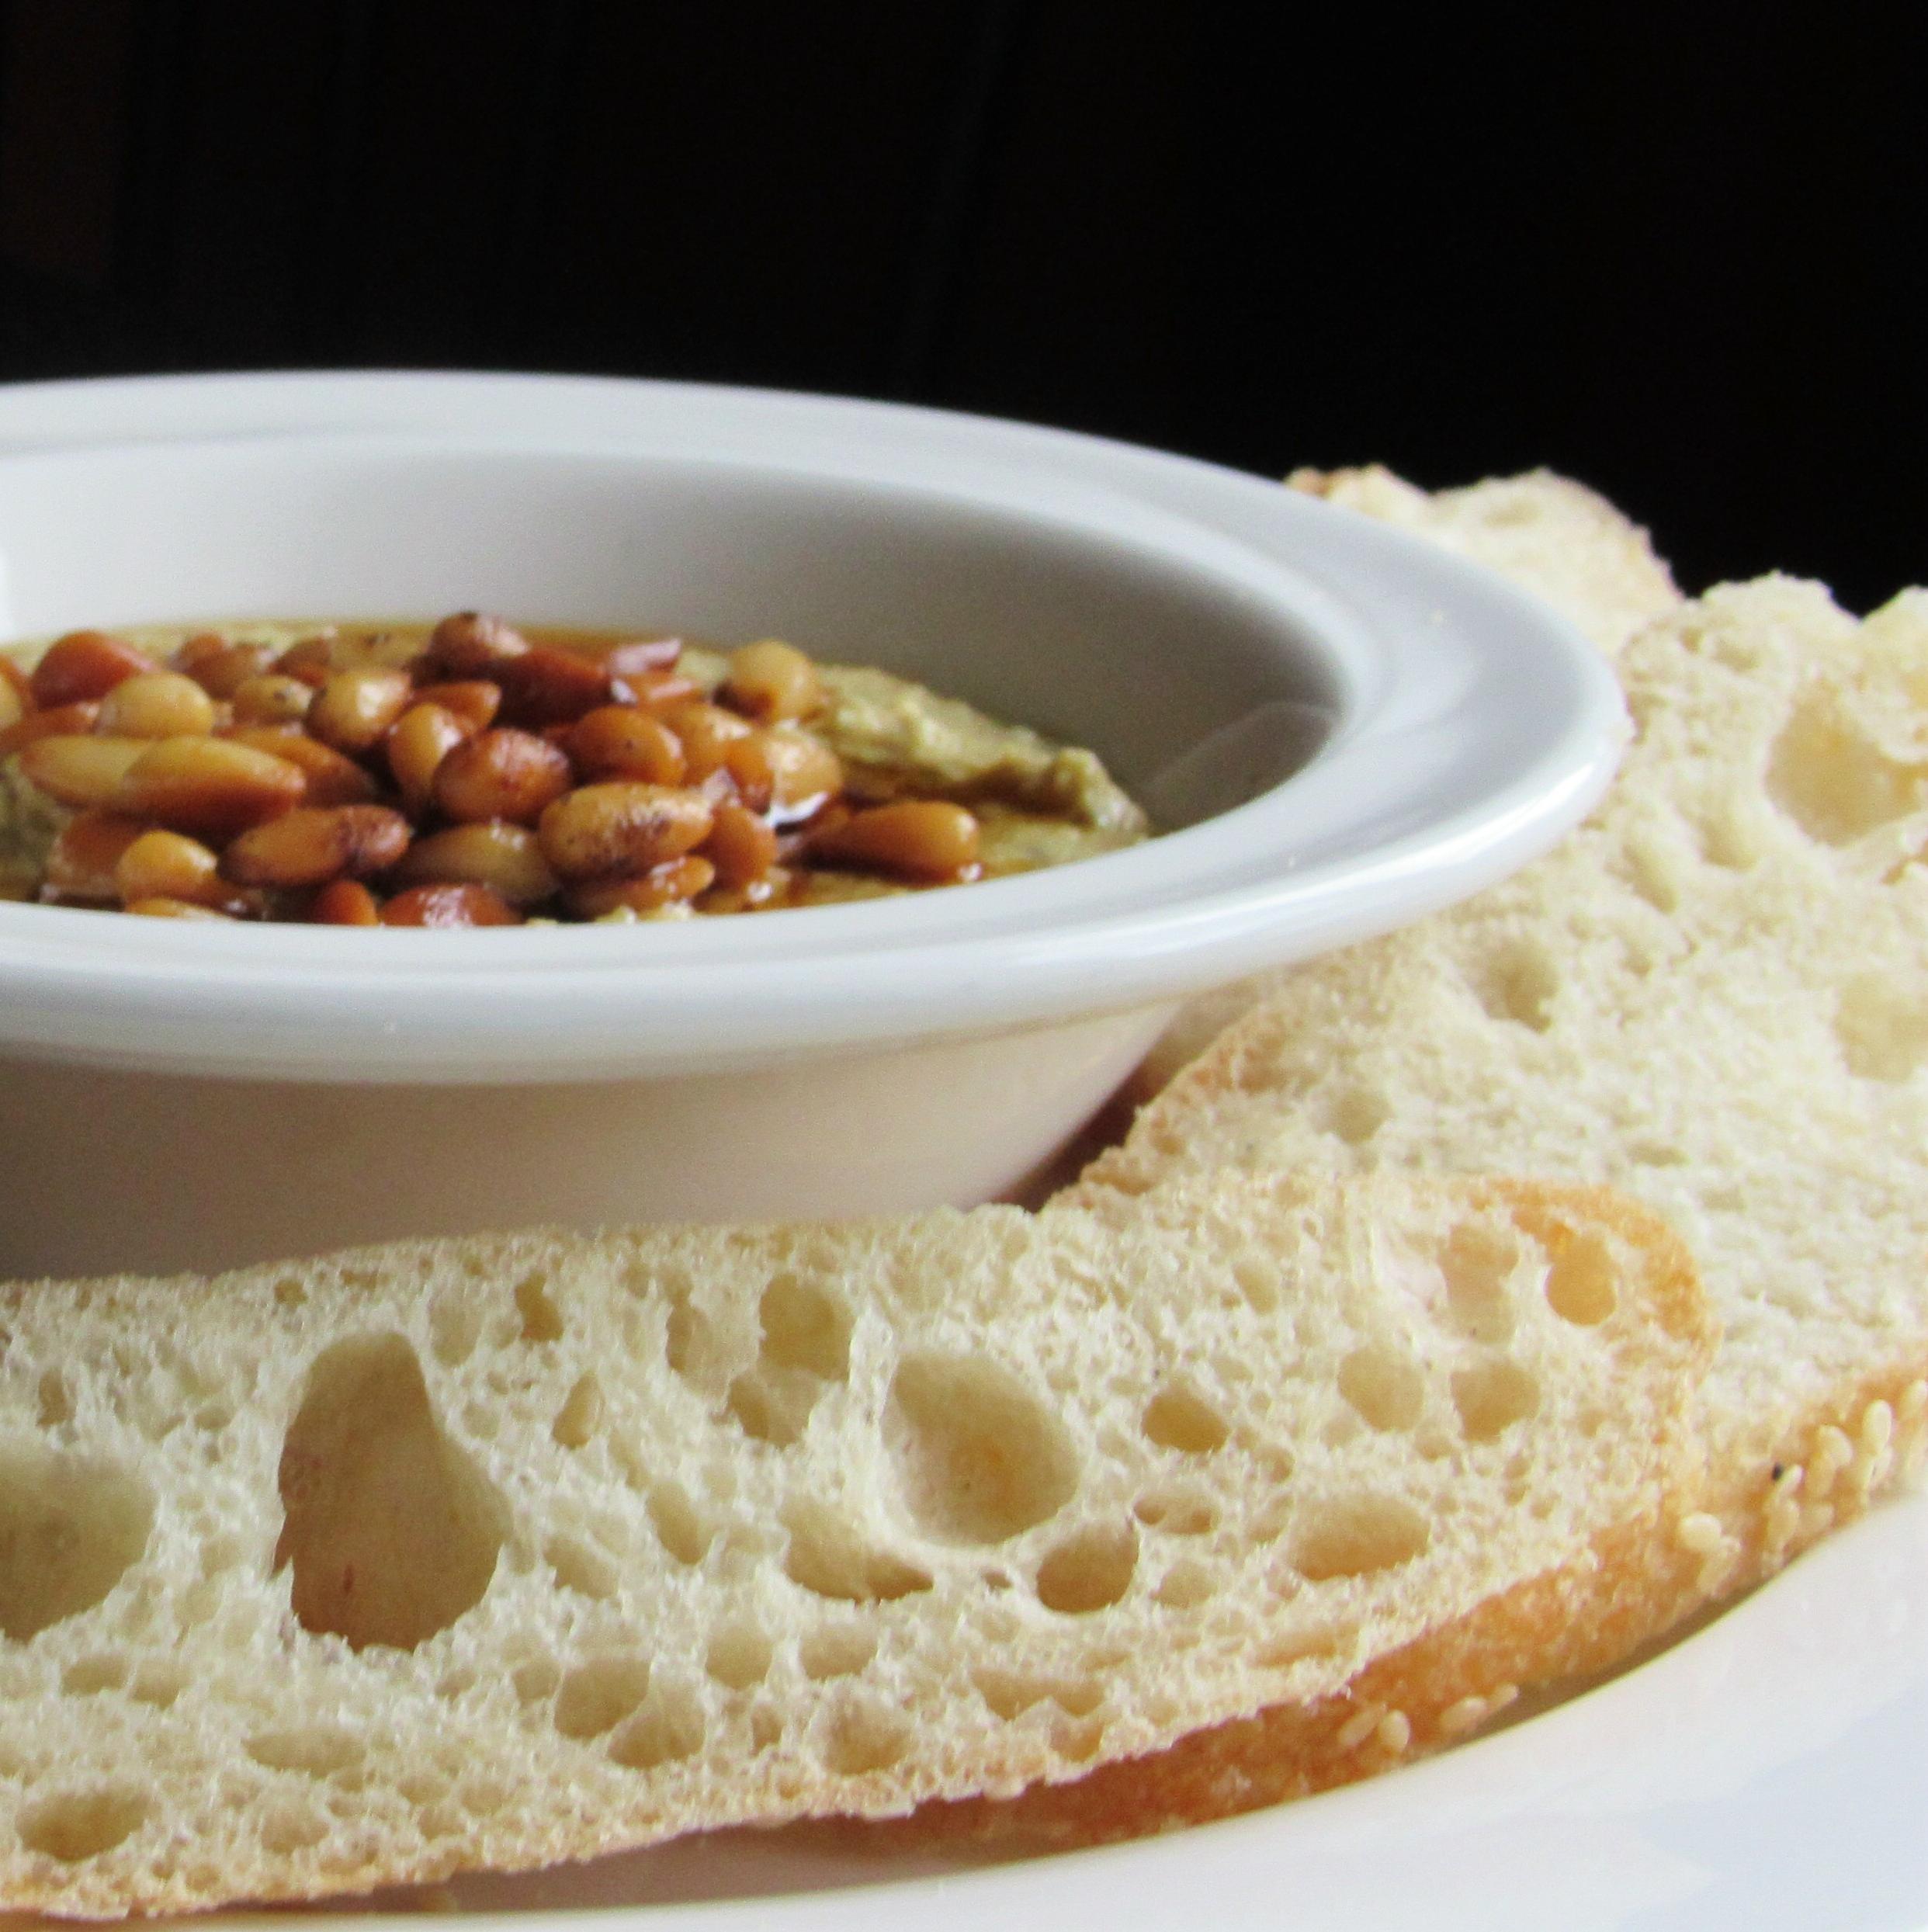  A platter of joy: My Turkish-inspired hummus with pine nuts.